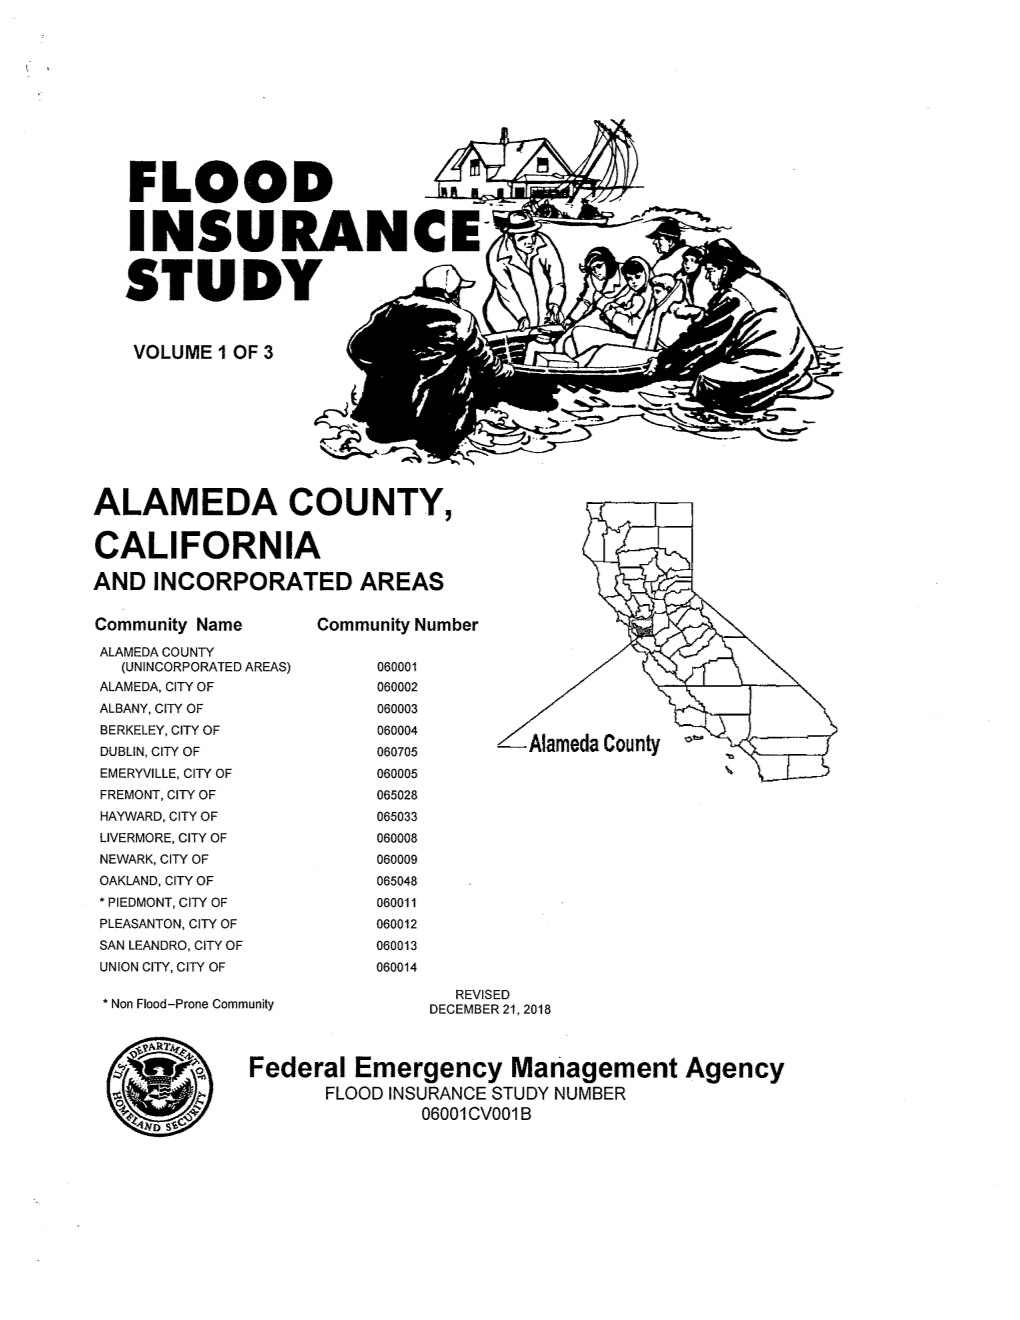 Alameda County, California and Incorporated Areas